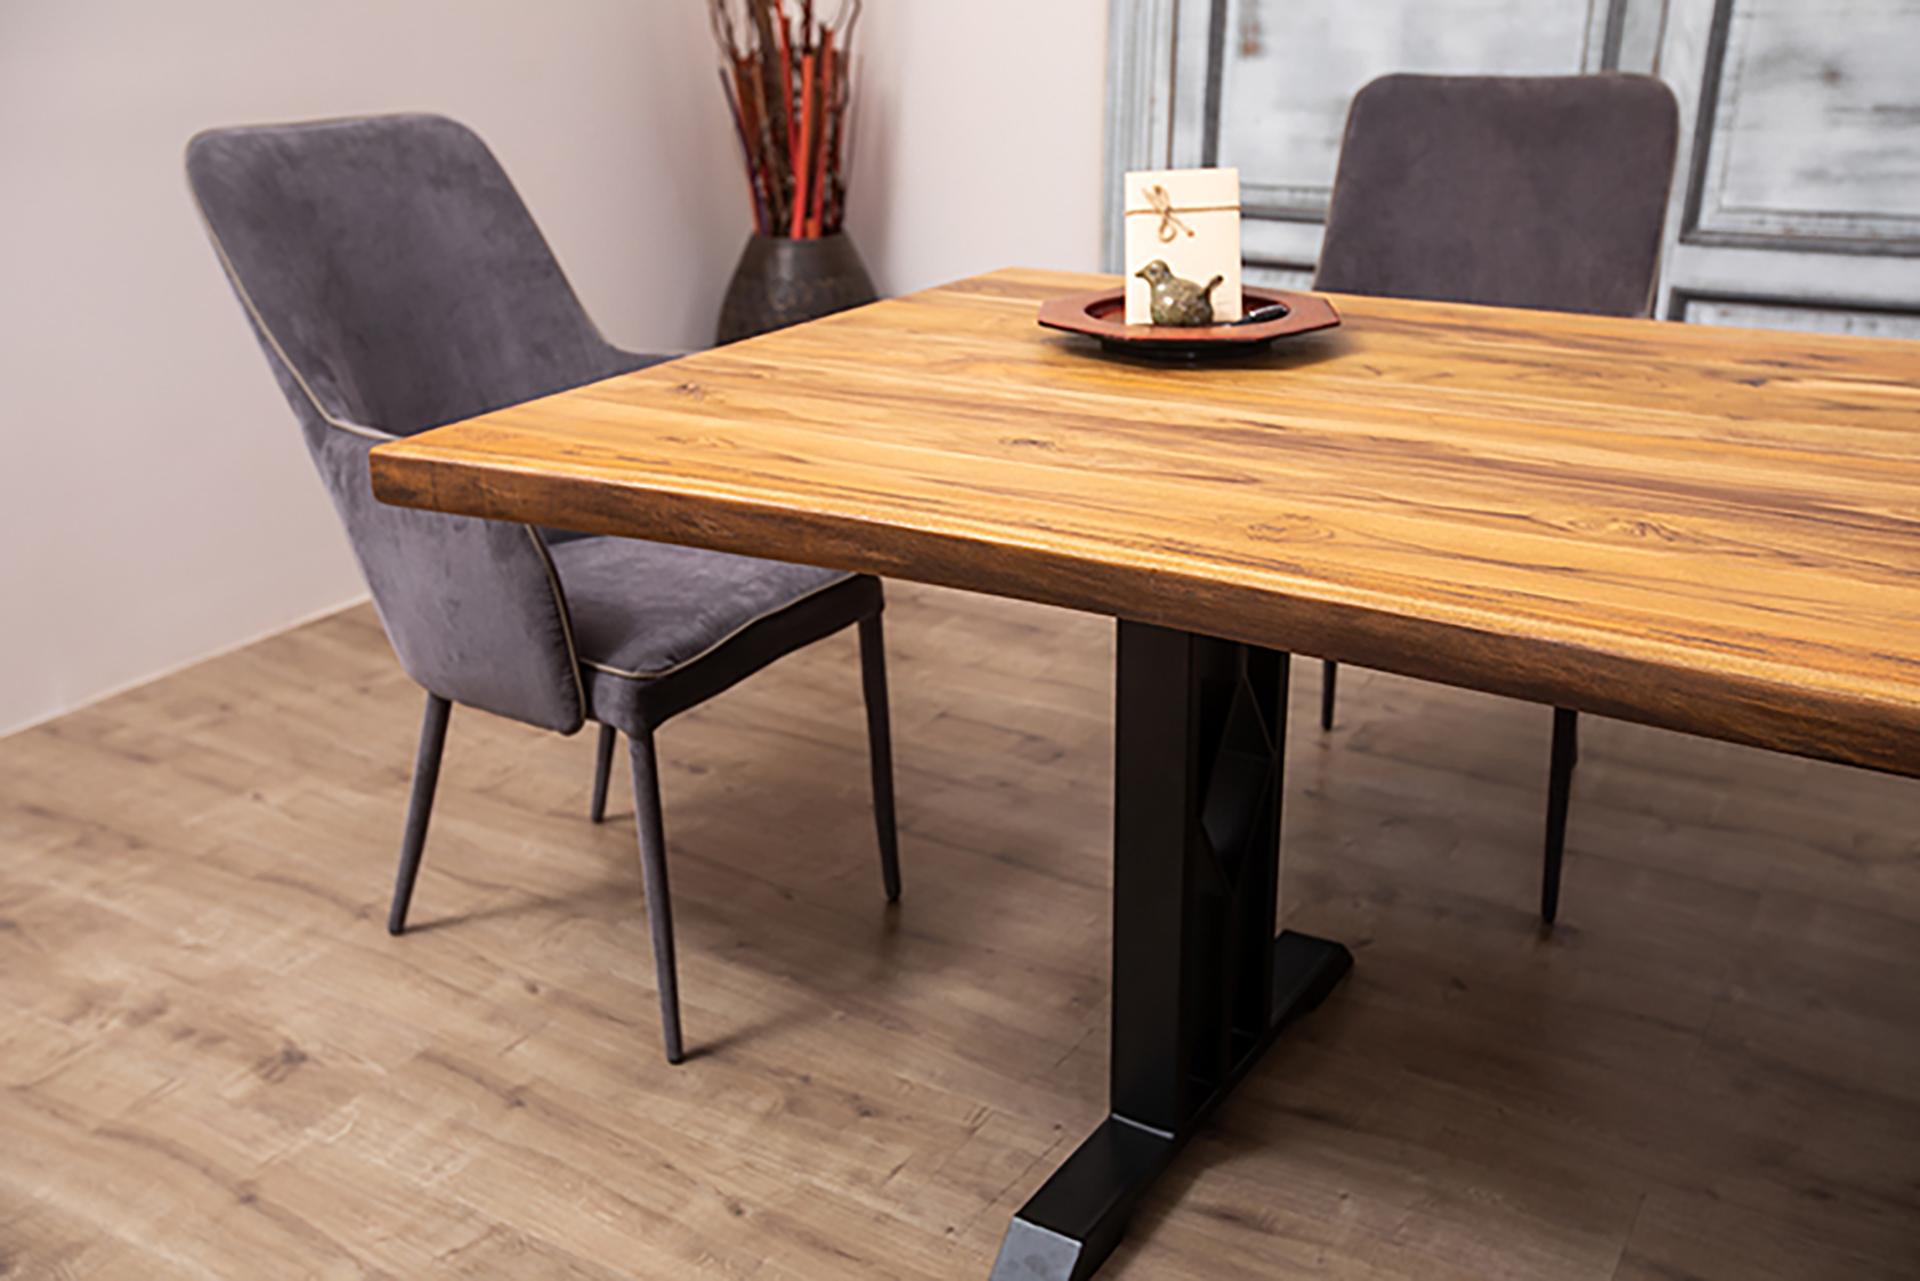 This hand-crafted, solid teak live edge dining table will make a stunning addition to any dining area with a combination of modern design and natural beauty. Breathtaking solid wood perfectly preserved in its most natural state makes this product